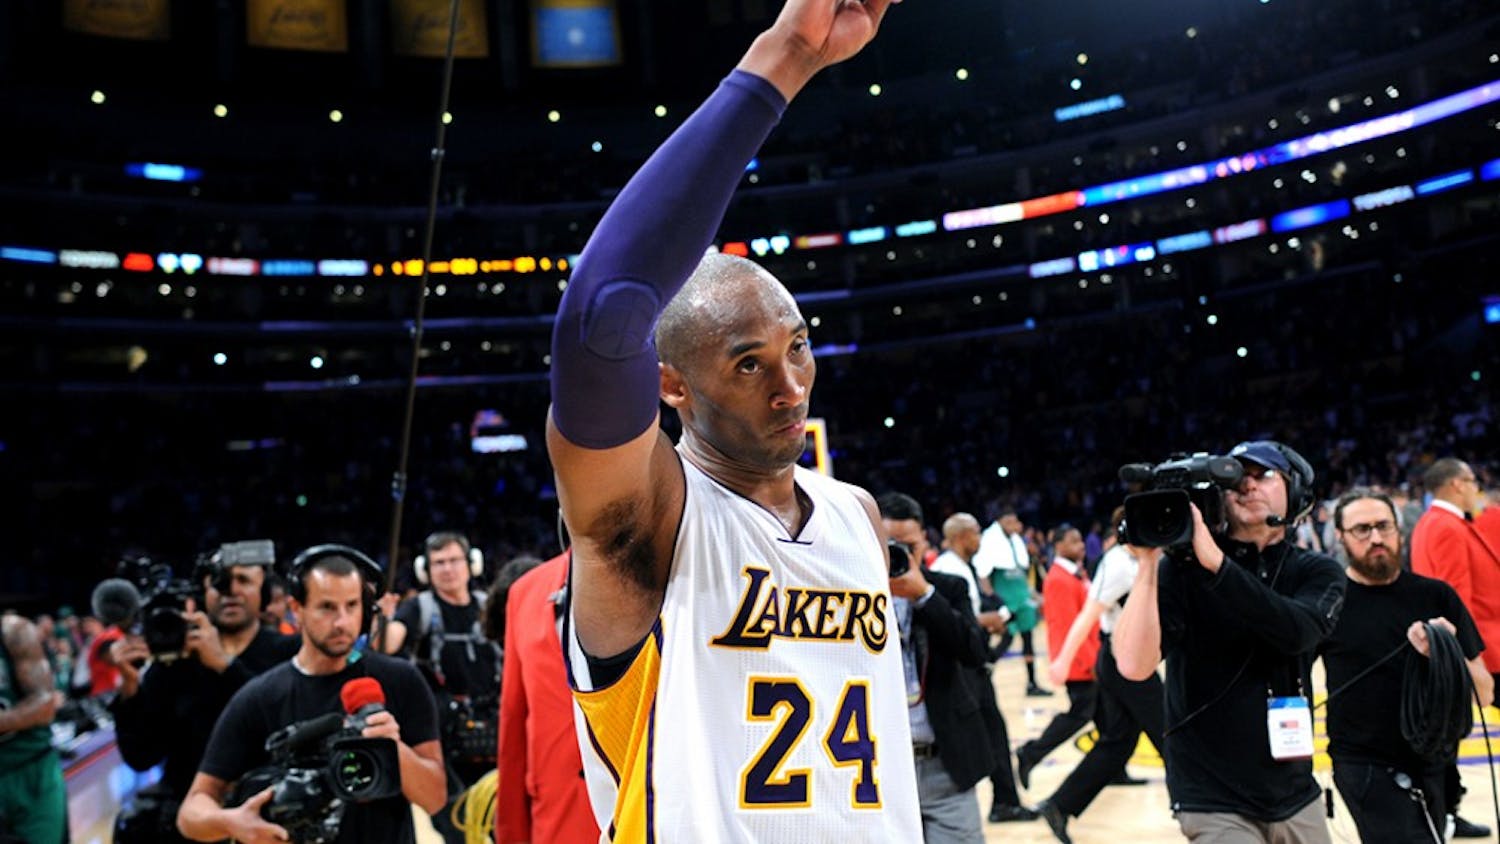 The Los Angeles Lakers&apos; Kobe Bryant waves to the crowd as he leaves the court following a 107-100 loss against the Boston Celtics at Staples Center in Los Angeles on Sunday, April 3, 2016. (Wally Skalij/Los Angeles Times/TNS)